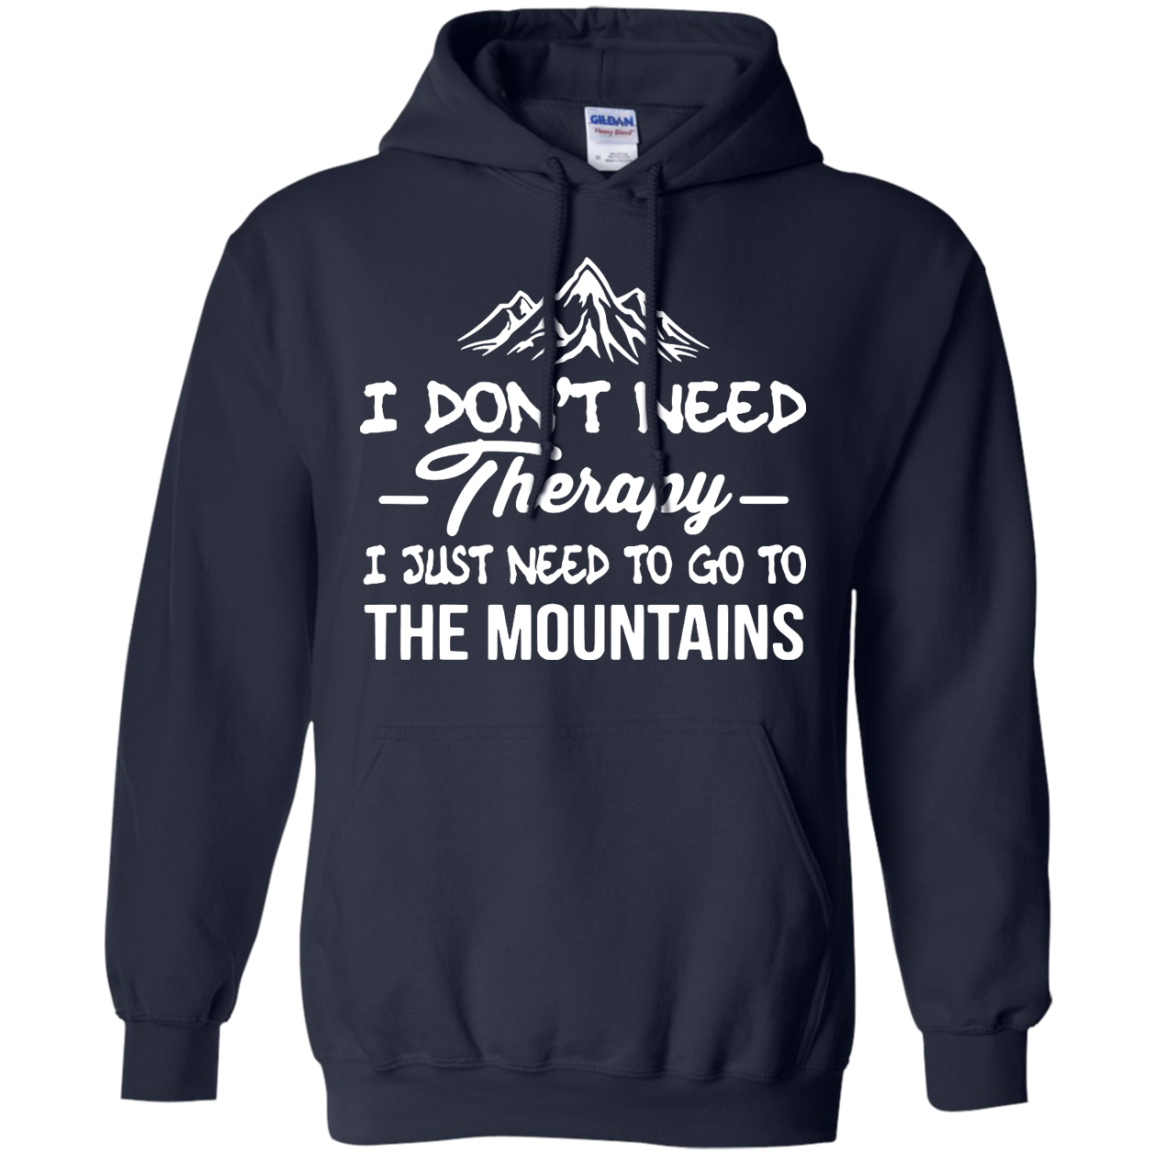 I don't need Therapy, I just need to go to the mountains - ifrogtees